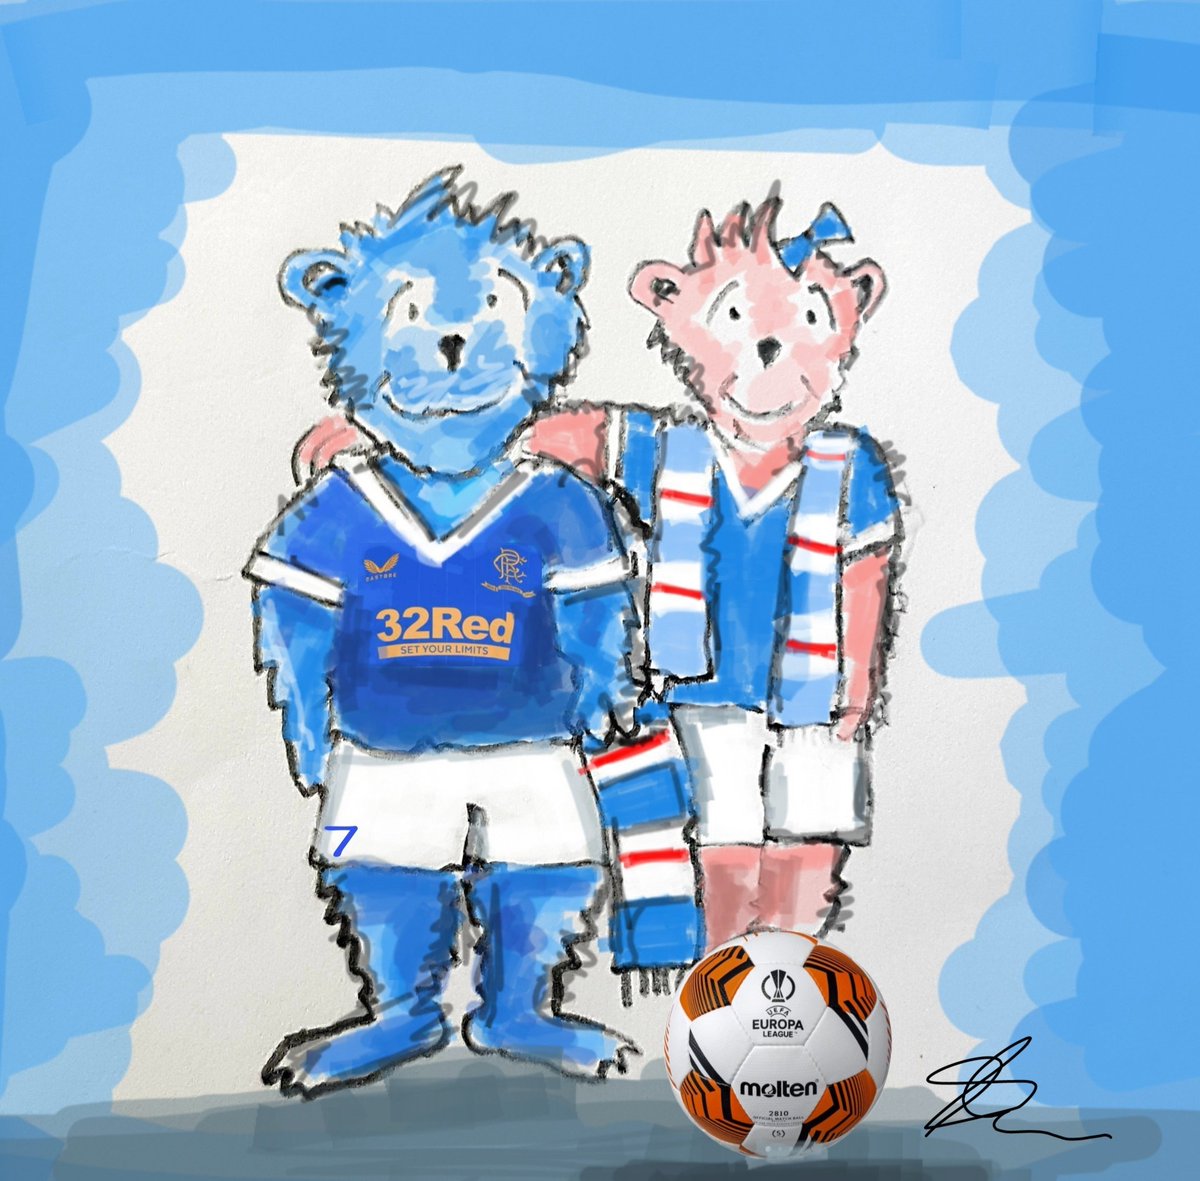 WELL DONE GERS! ON A GREAT EUROPEAN NIGHT!. BLUE AND CASSIE SUPPORTING THE FAMOUS GLASGOW RANGERS!...Follow their adventures in our book 'Blue bear and the competition'..ebay.co.uk/itm/1544706993…